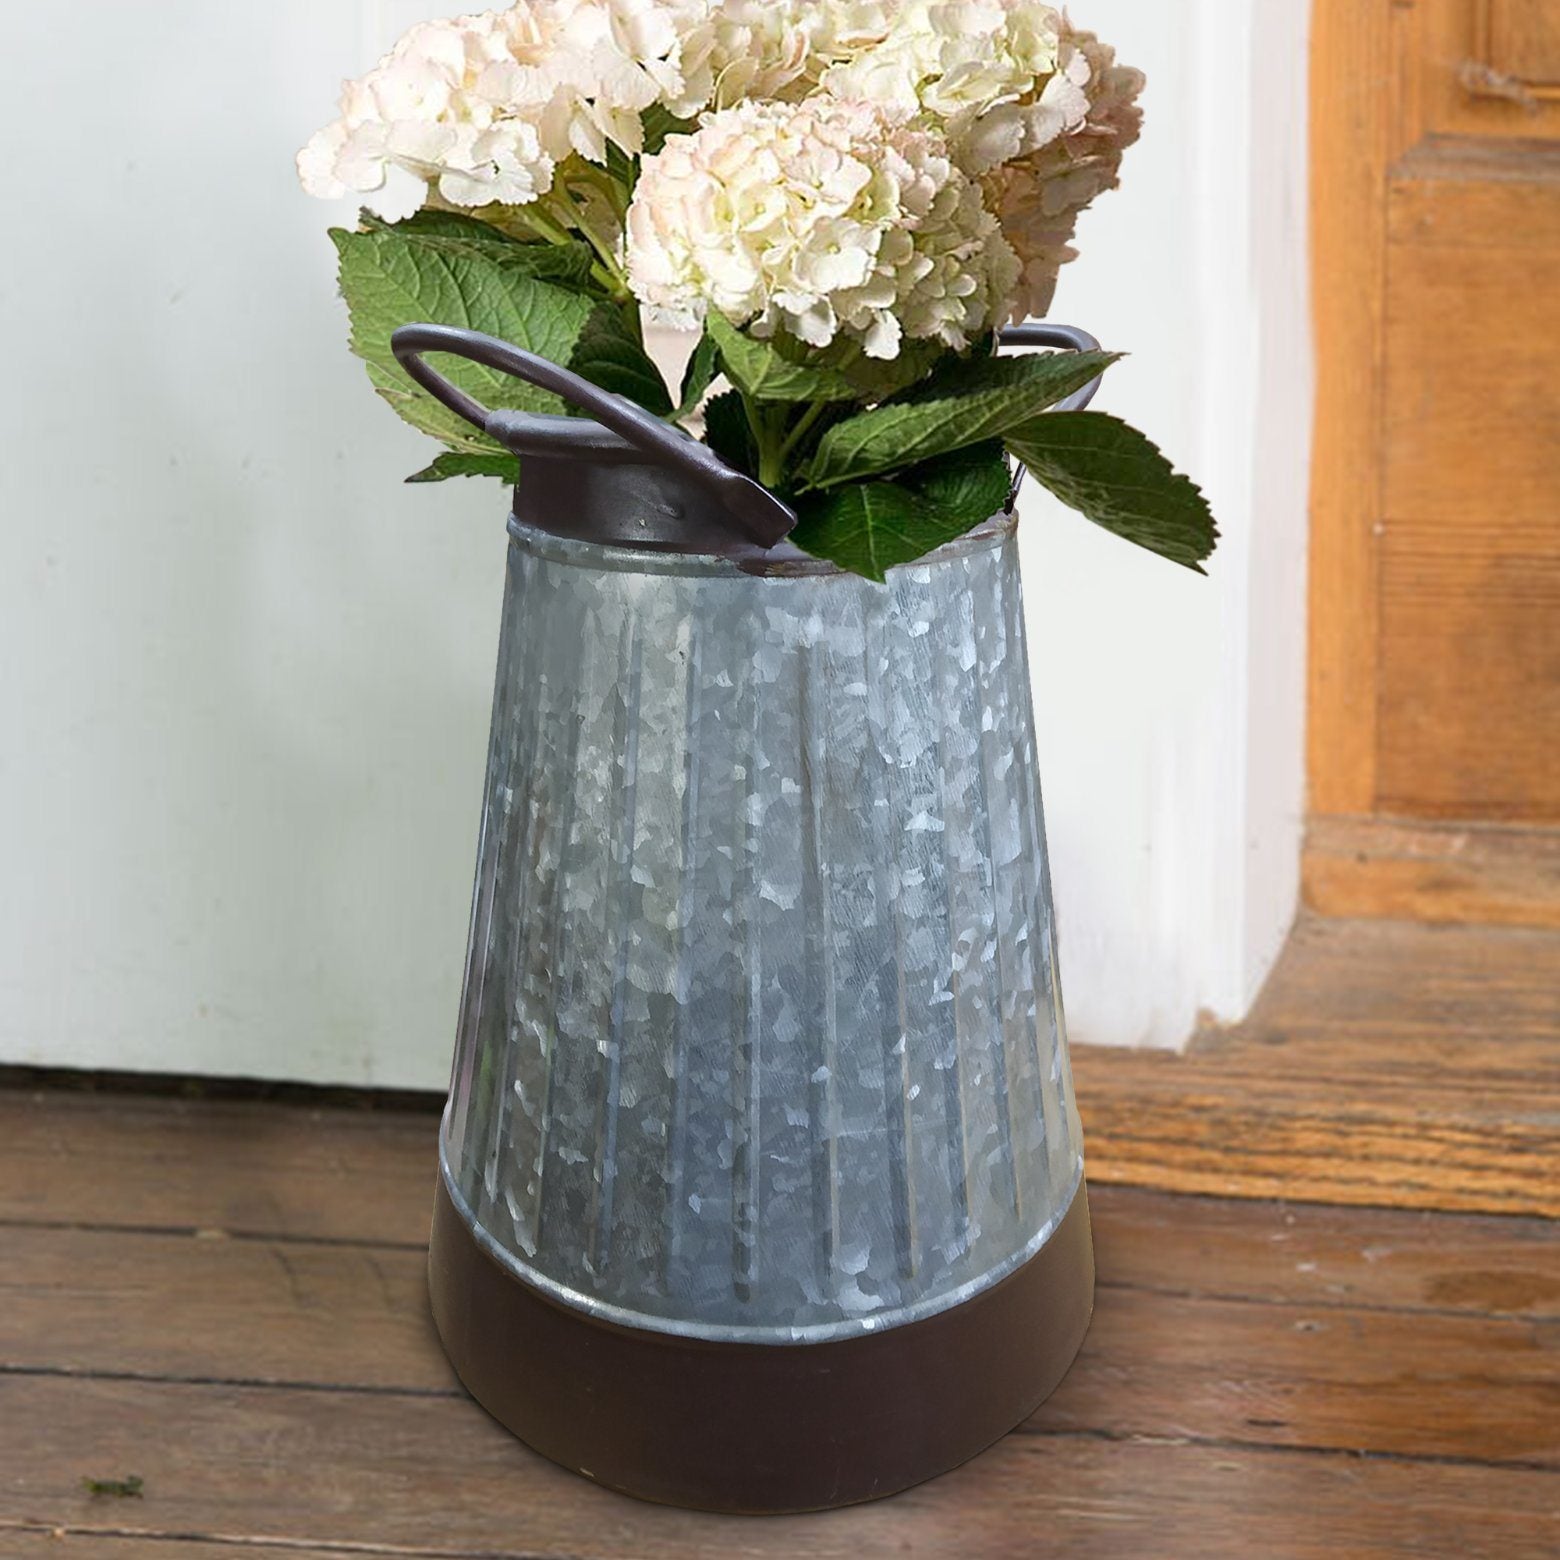 A vintage Galvanized Metal Corrugated Flower Vase with Curved Side Handles, filled with hydrangea flowers, positioned against a wooden door and white wall.